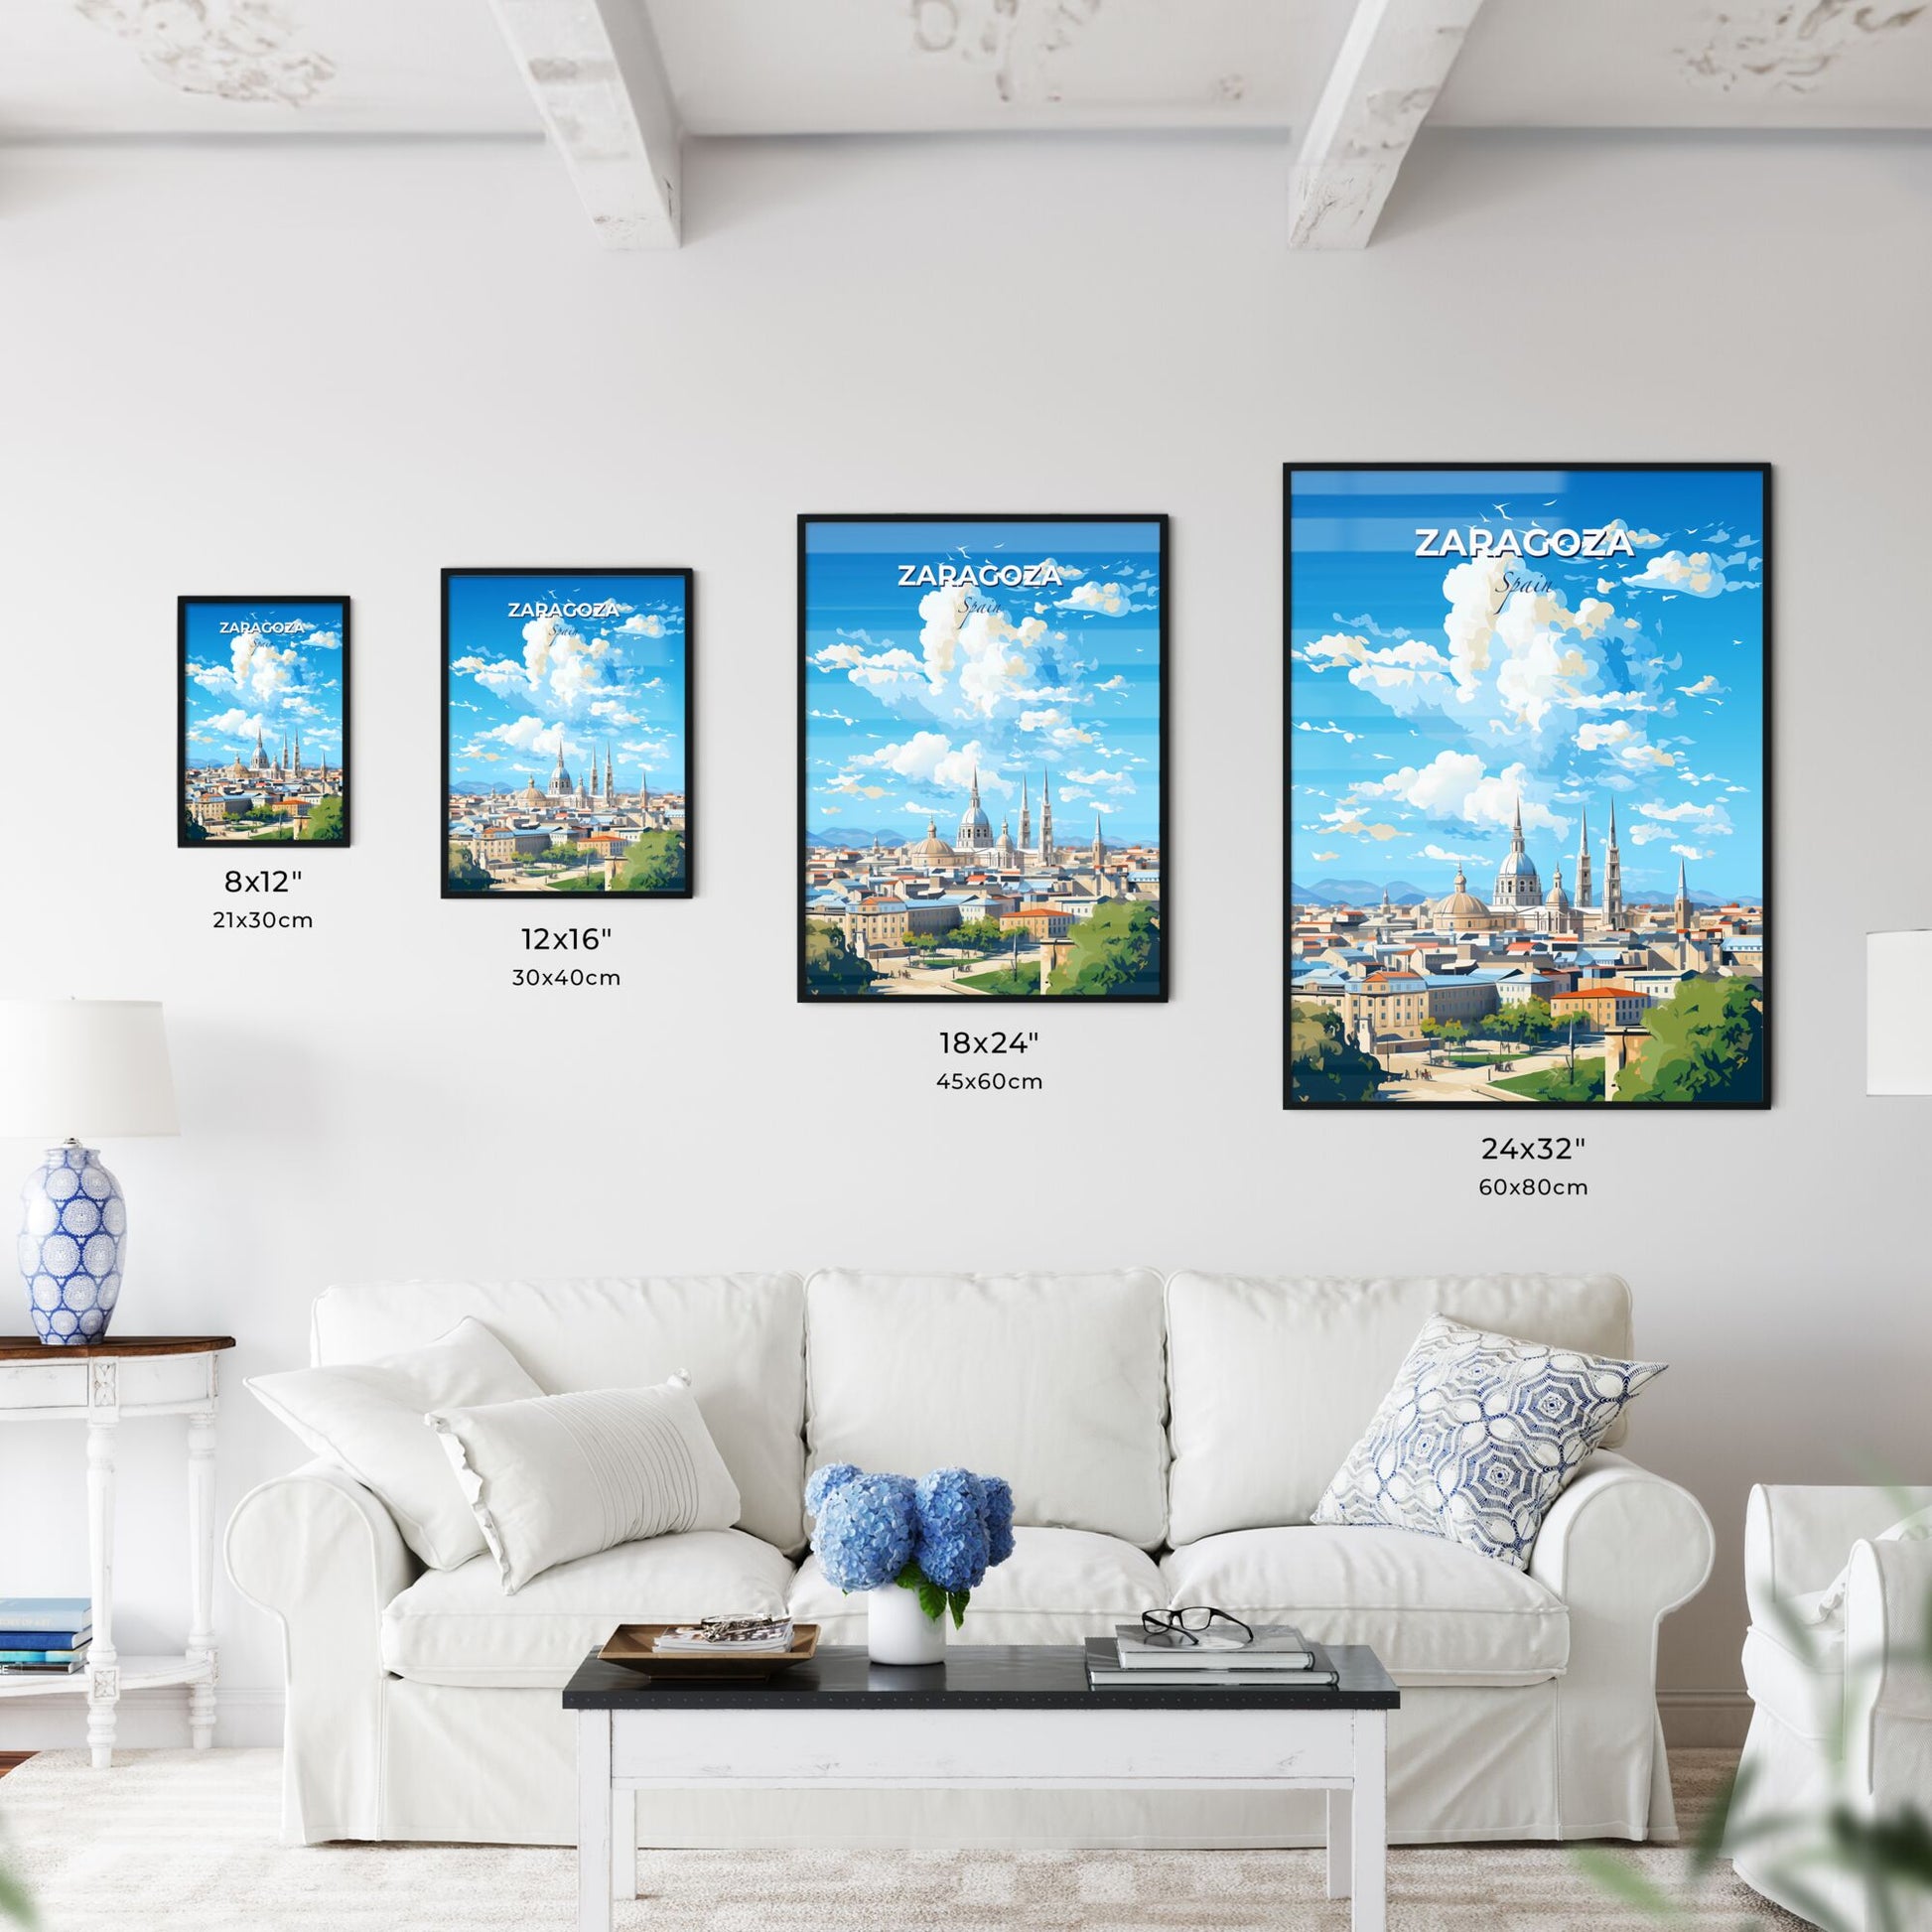 Zaragoza Spain Skyline - A City With Many Spires And Towers - Customizable Travel Gift Default Title